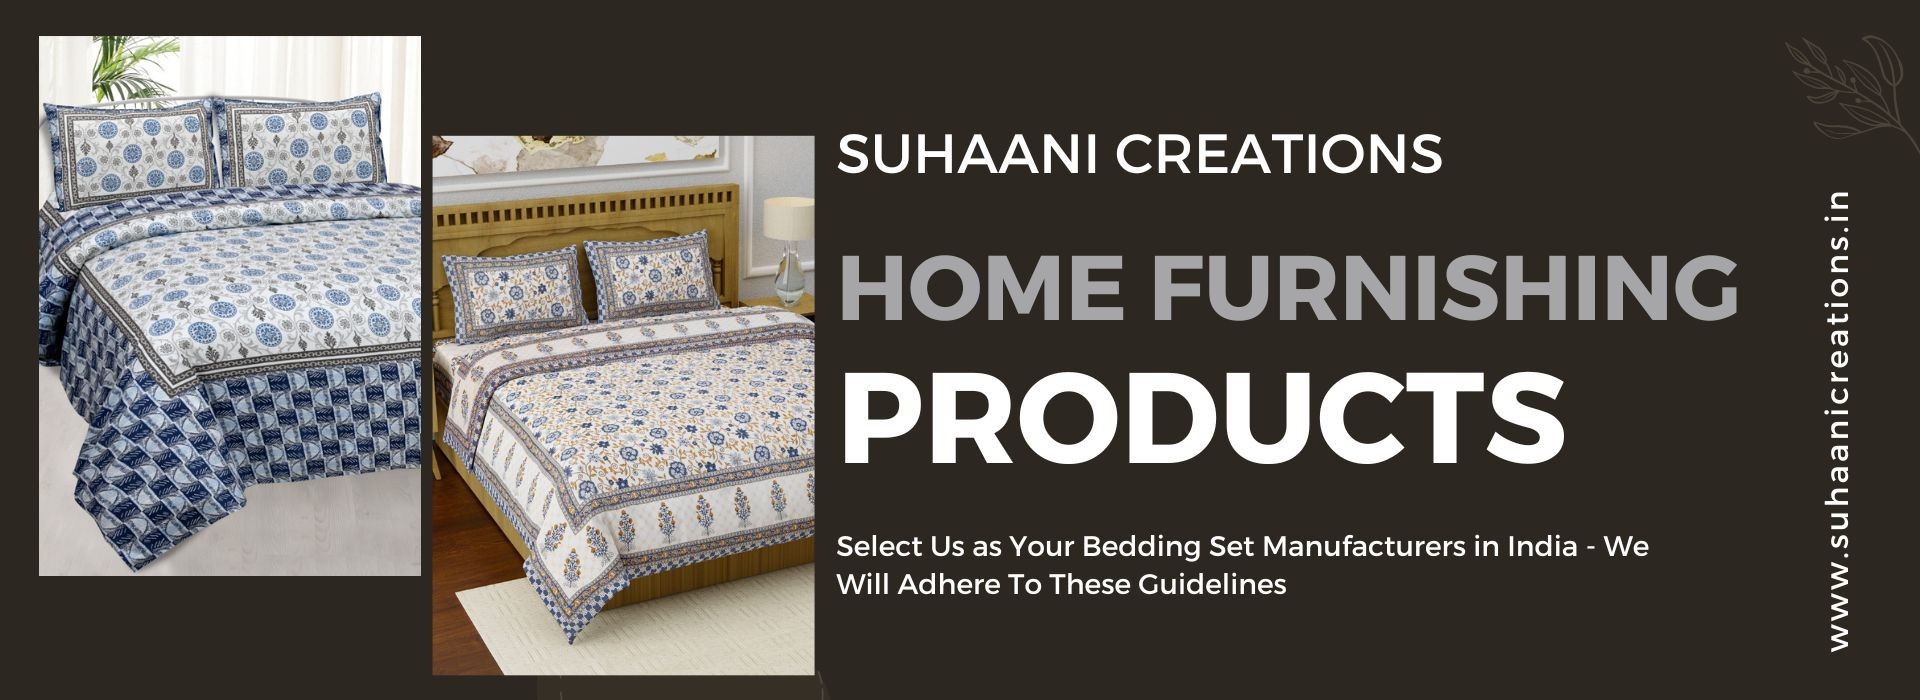 Home Furnishing Products-Choose Best Wholesale For Resale Purpose